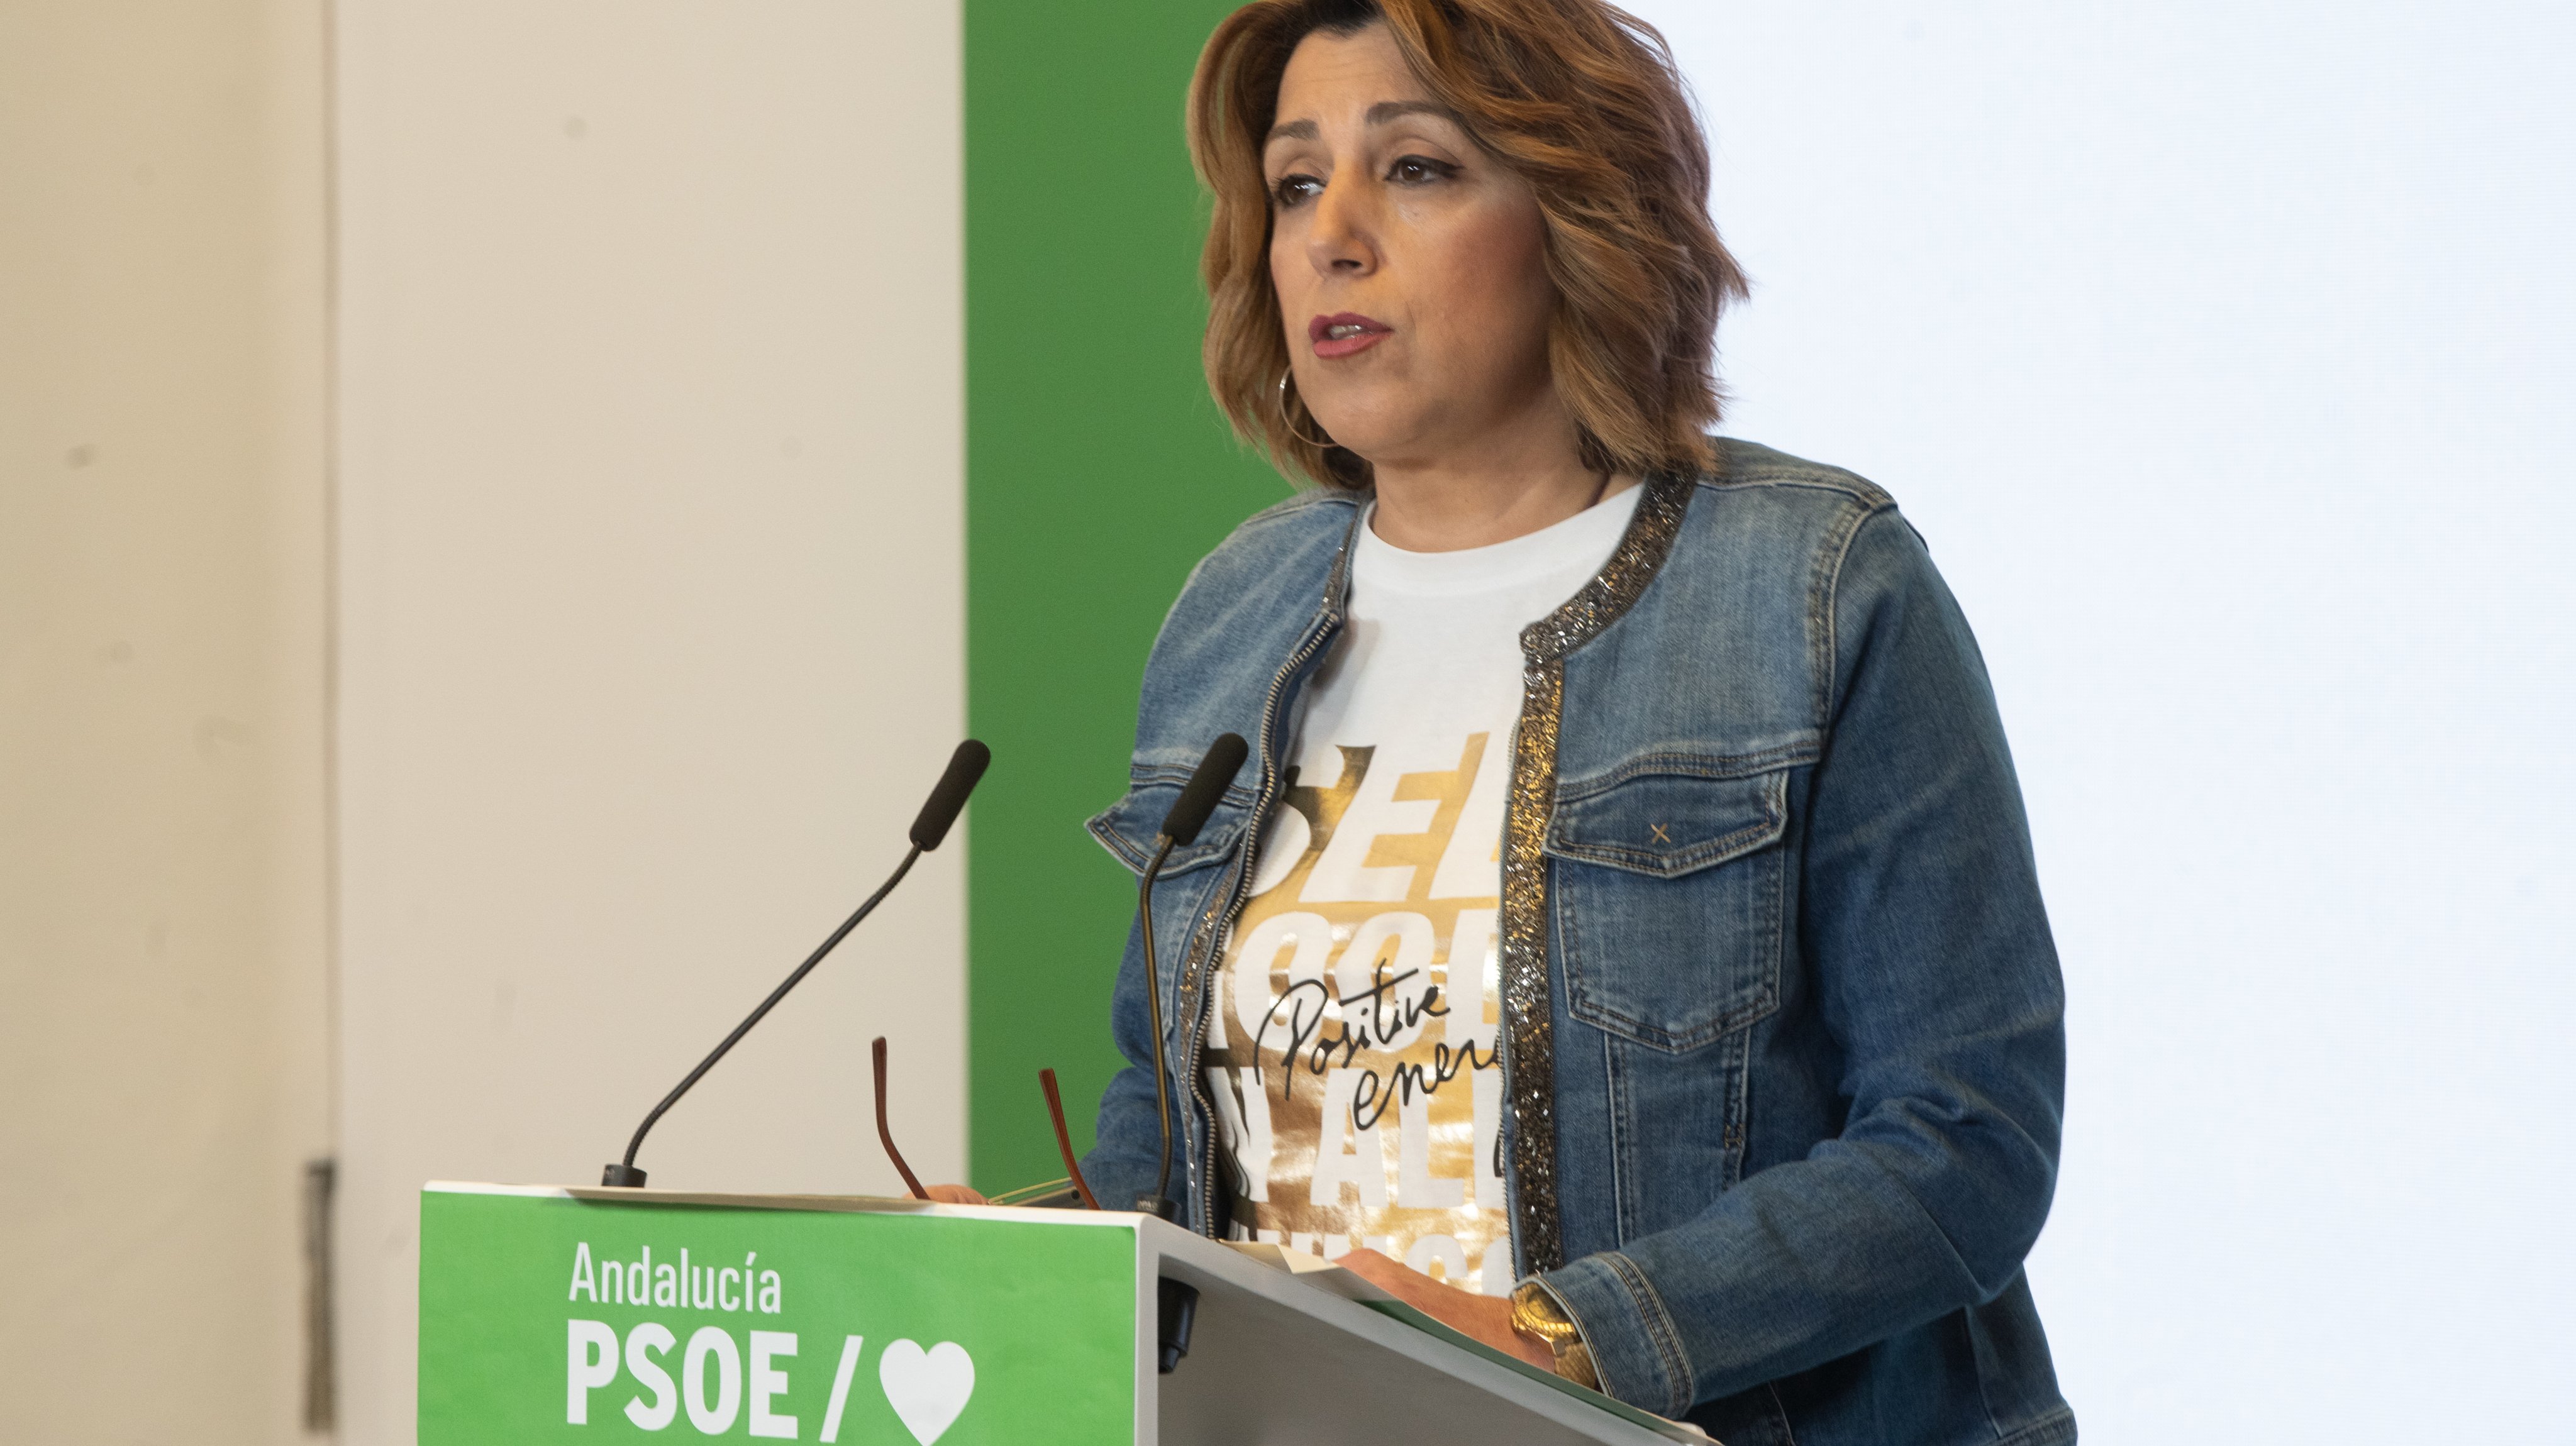 Susana Diaz, Offers A Press Conference On The Occasion Of The Meeting Of The Regional Executive Committee